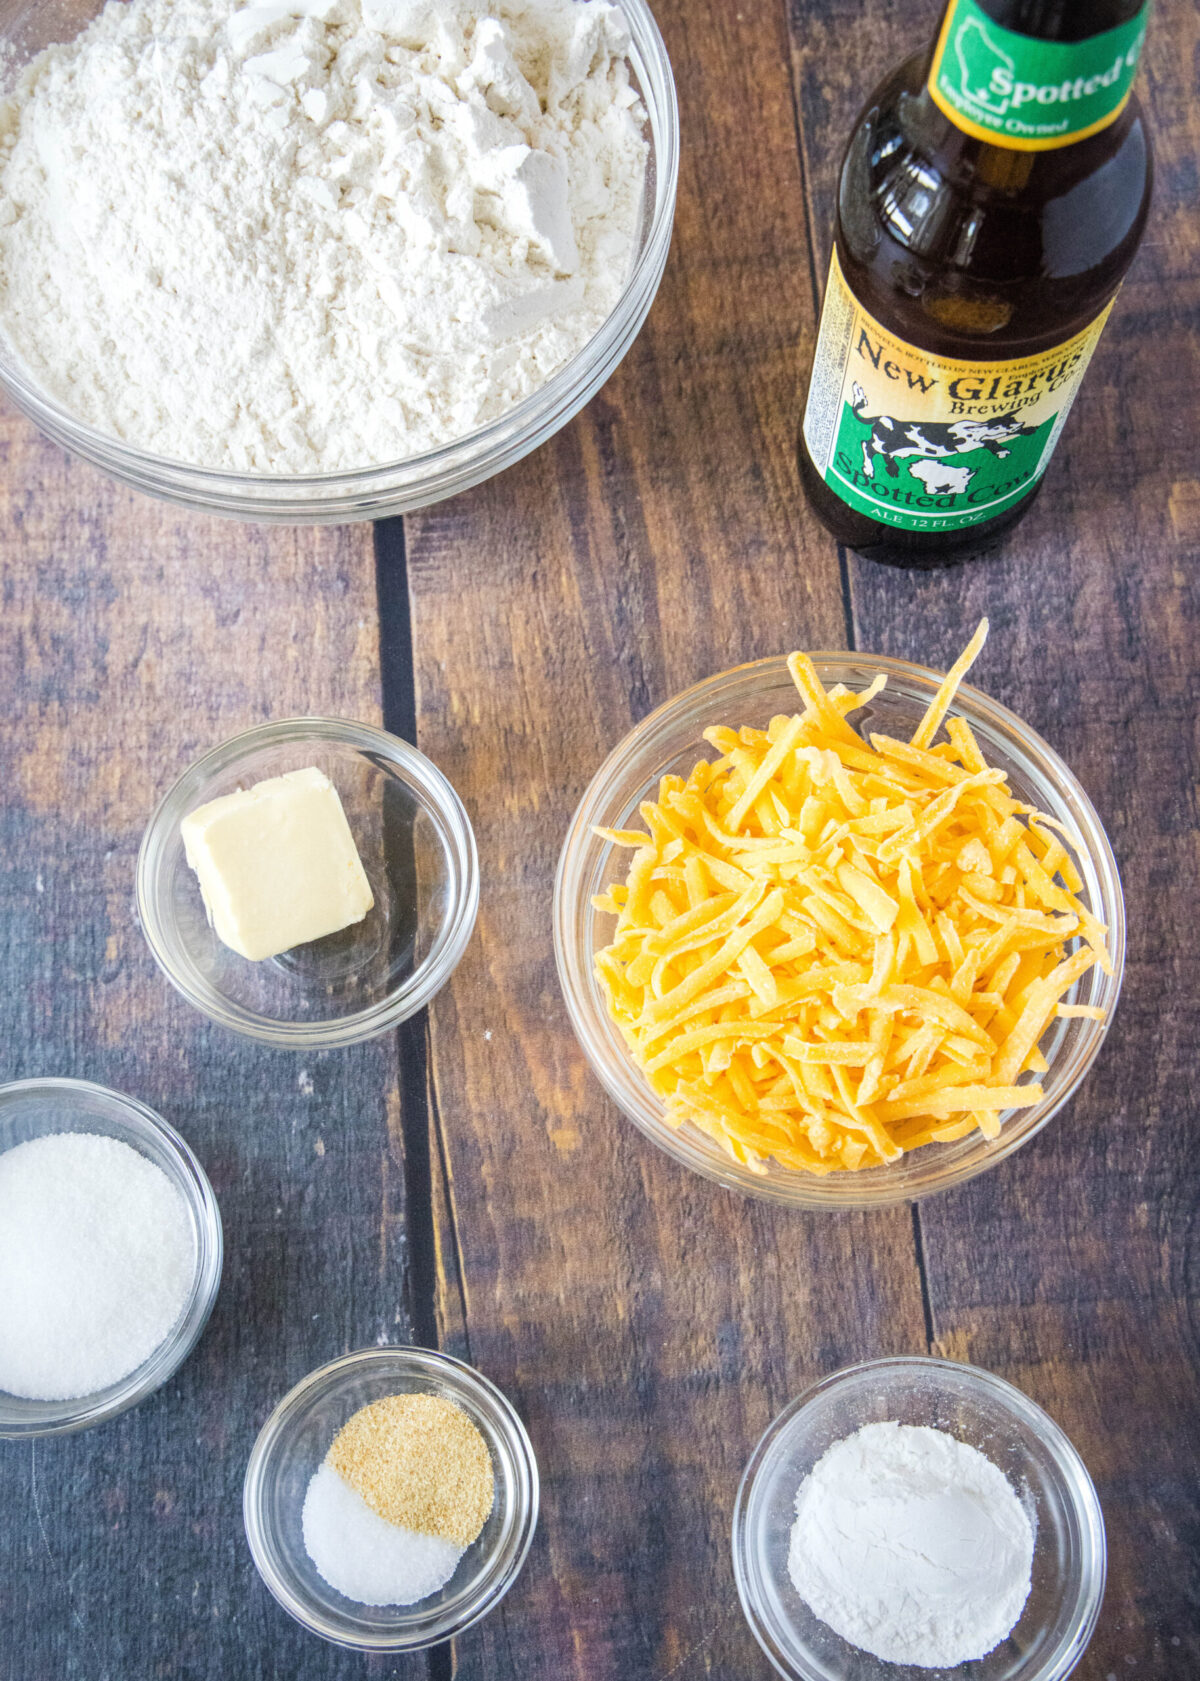 Overhead view of the ingredients needed for beer bread: a bowl of flour, a bowl of cheese, a bowl of baking powder, a bowl of sugar, a bowl of salt and garlic powder, a bowl of butter, and a bottle of beer